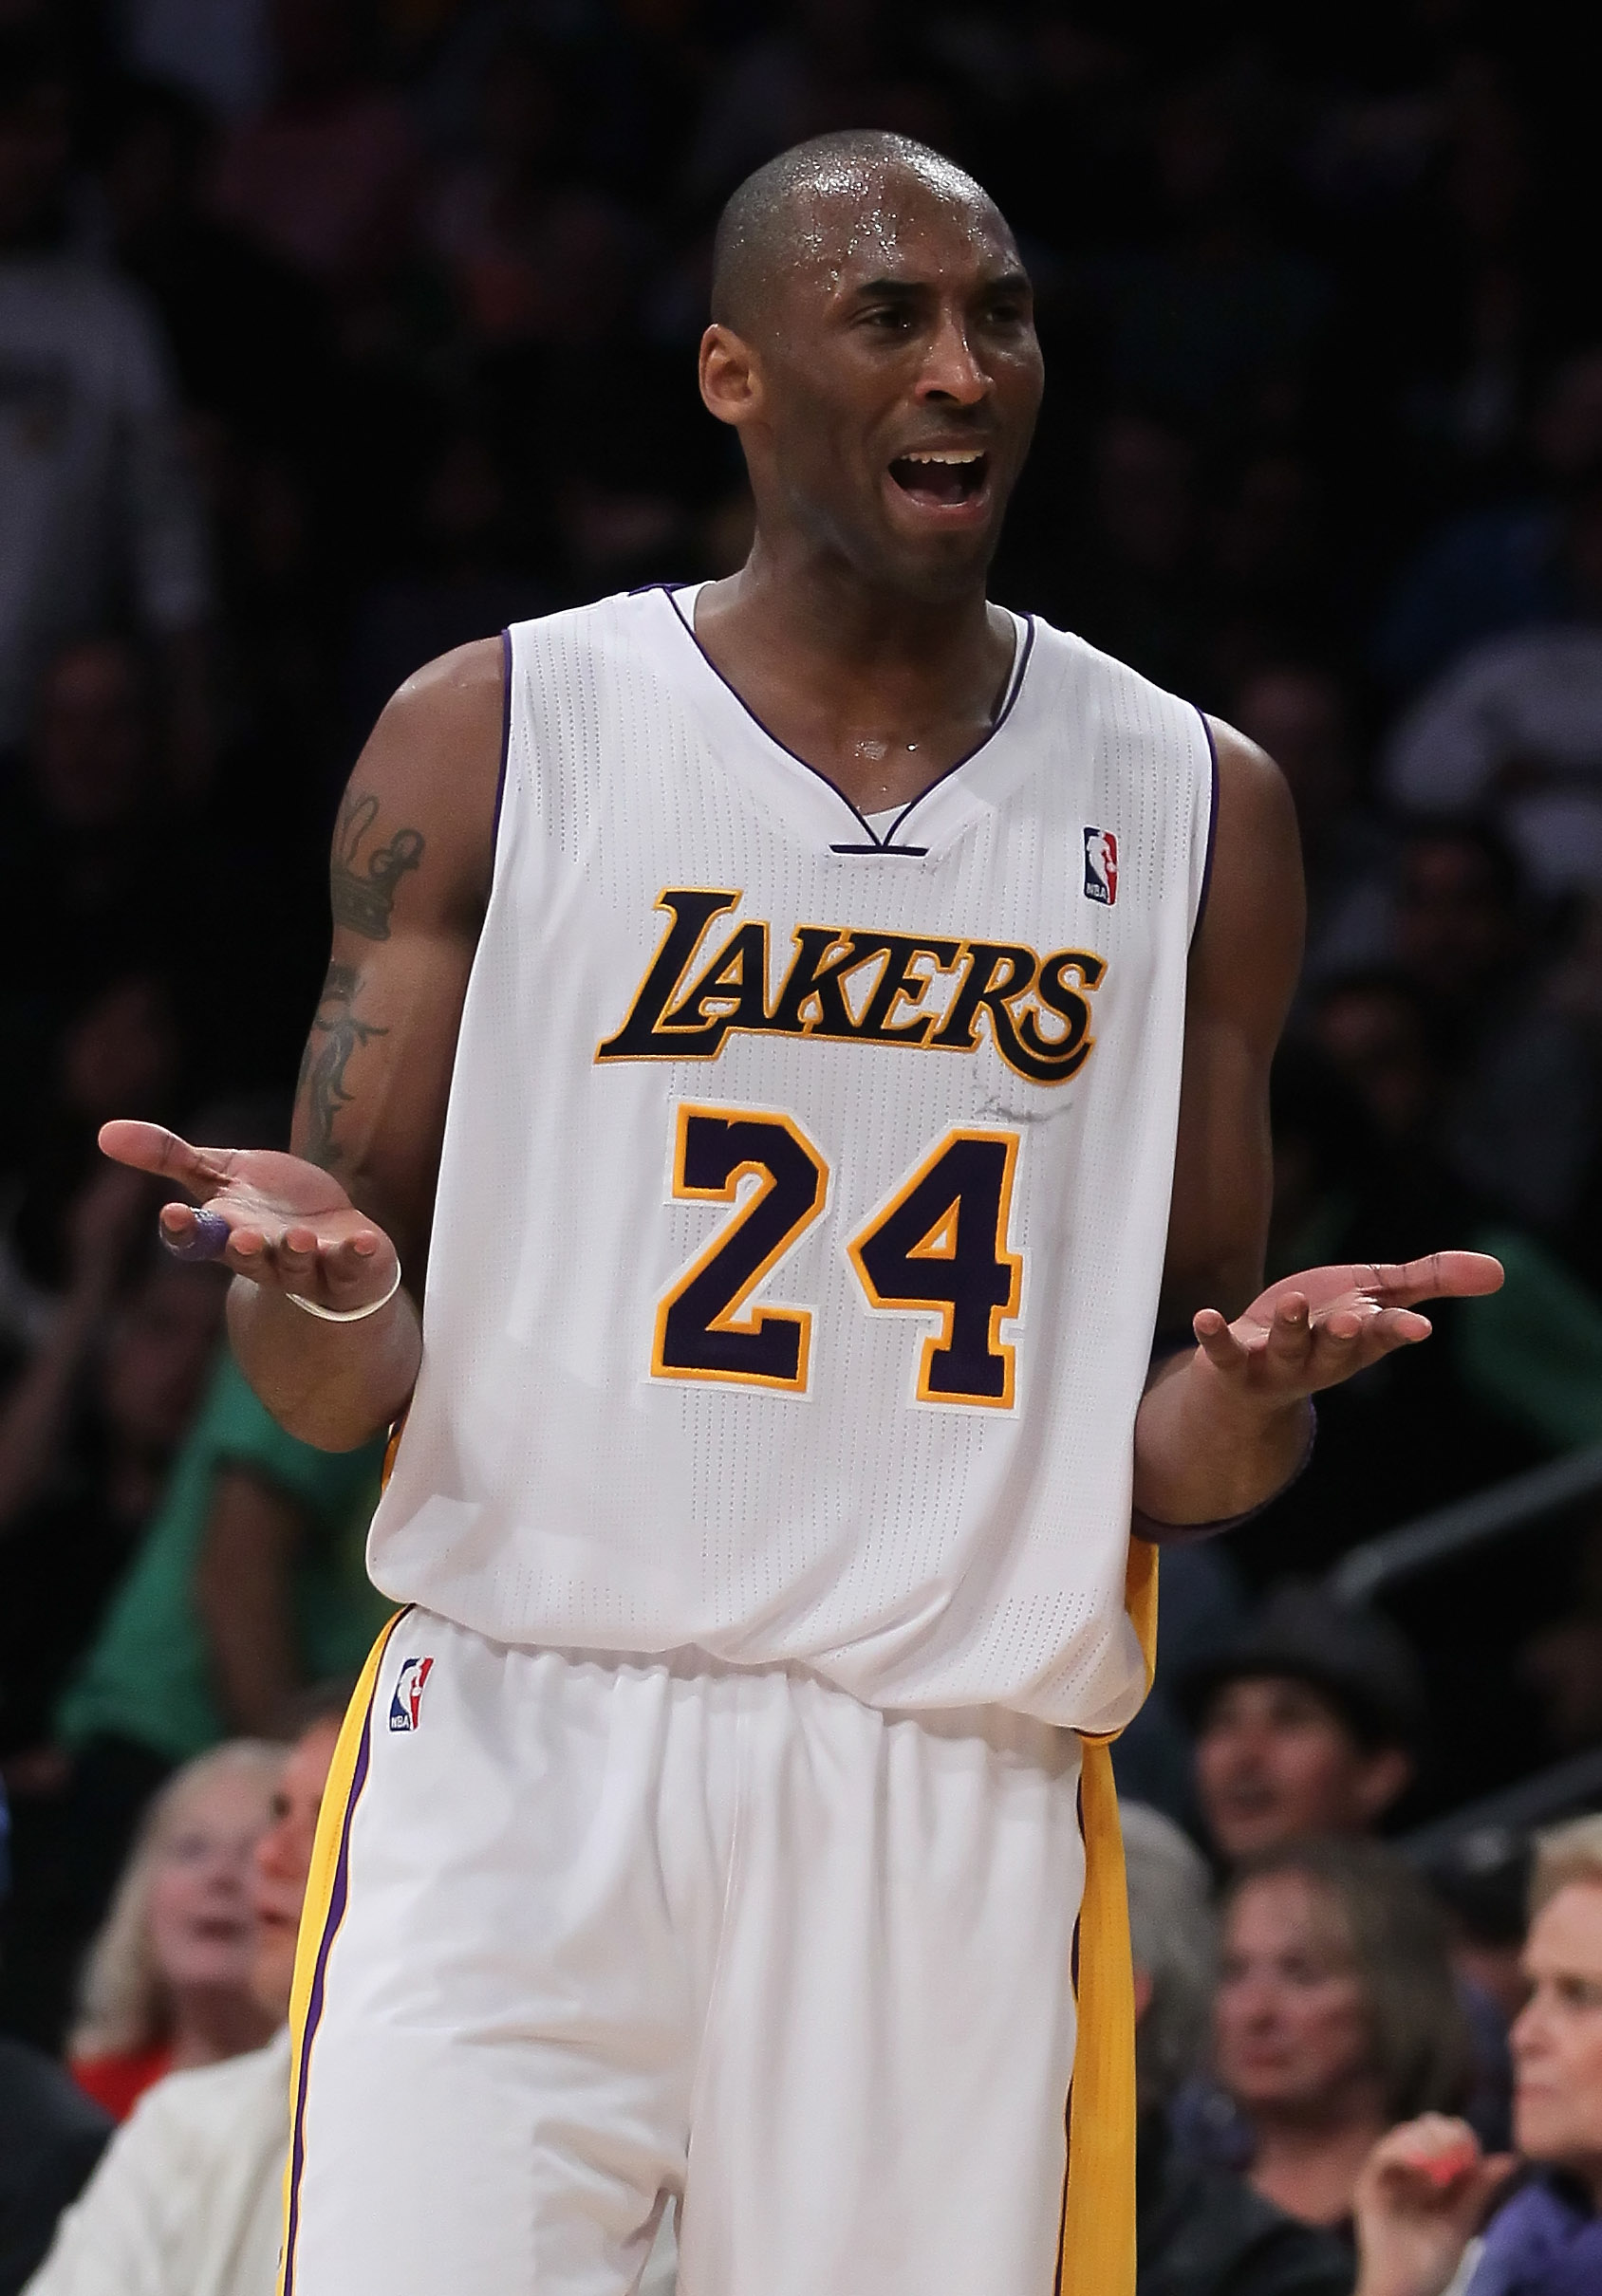 LOS ANGELES, CA - APRIL 10:  Kobe Bryant #24 of the Los Angeles Lakers argues a foul call in the second half against the Oklahoma City Thunder at Staples Center on April 10, 2011 in Los Angeles, California. The Thunder defeated the Lakers 120-106. NOTE TO